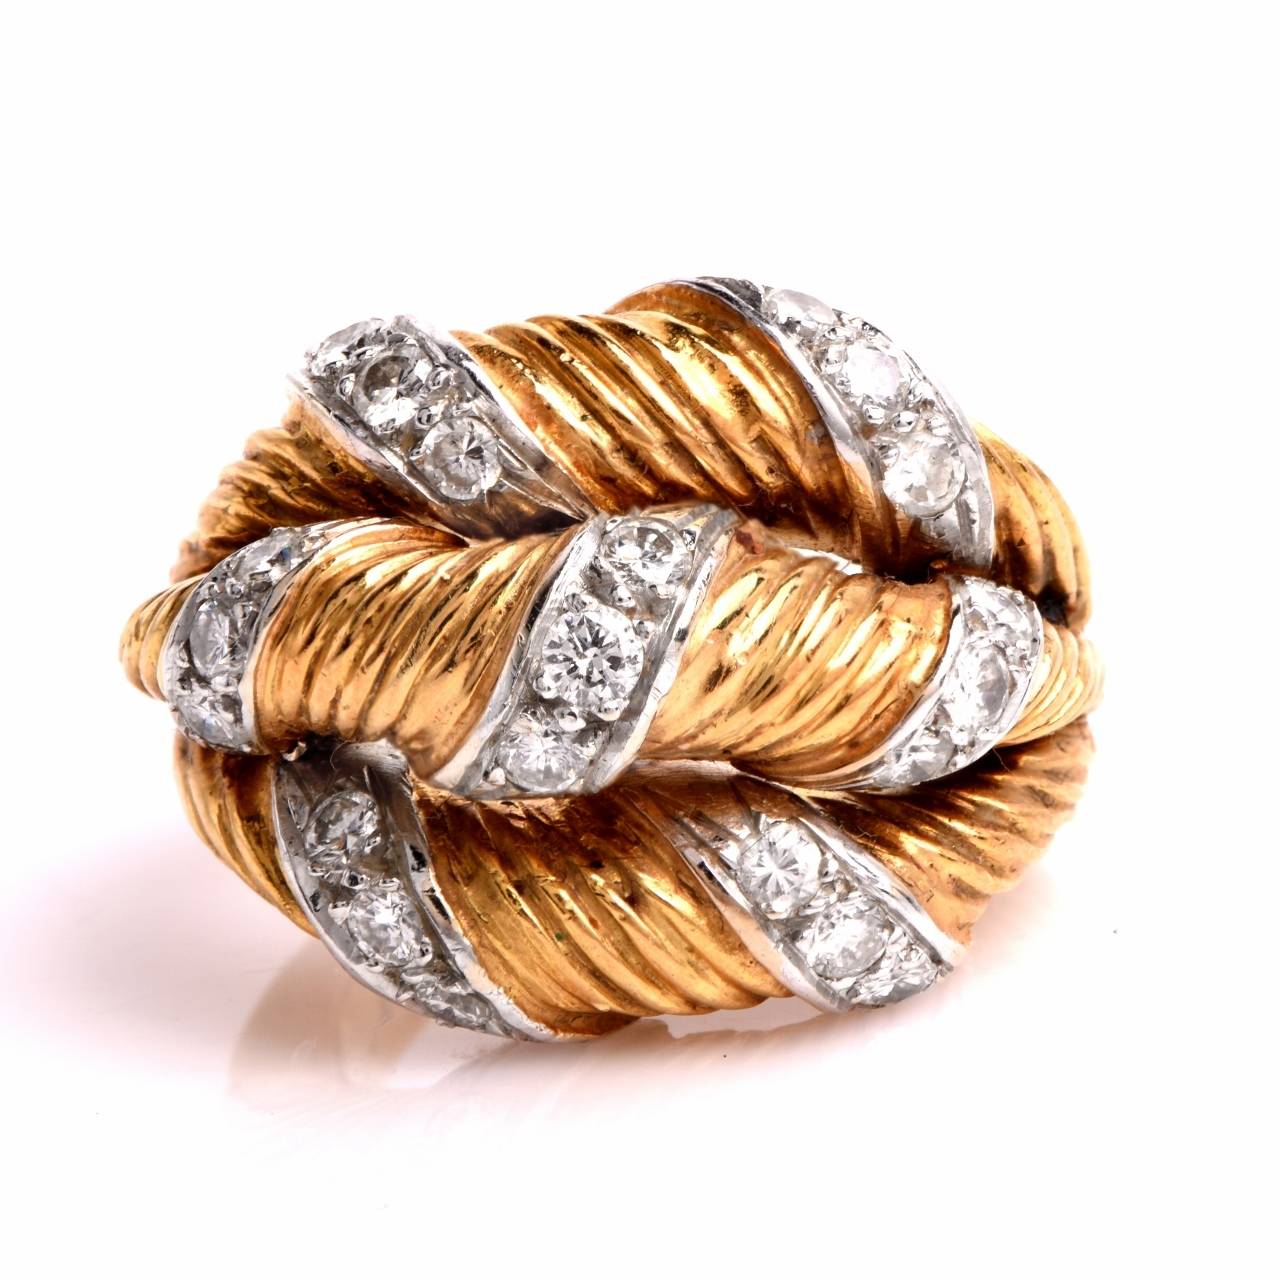 This creatively designed estate cocktail ring simulating triple bands side-by-side, is crafted in artfully textured, 18K yellow gold, weighs 19.00 grams and measures 8 mm high.  The three gracefully domed bands are cumulatively adorned with 21